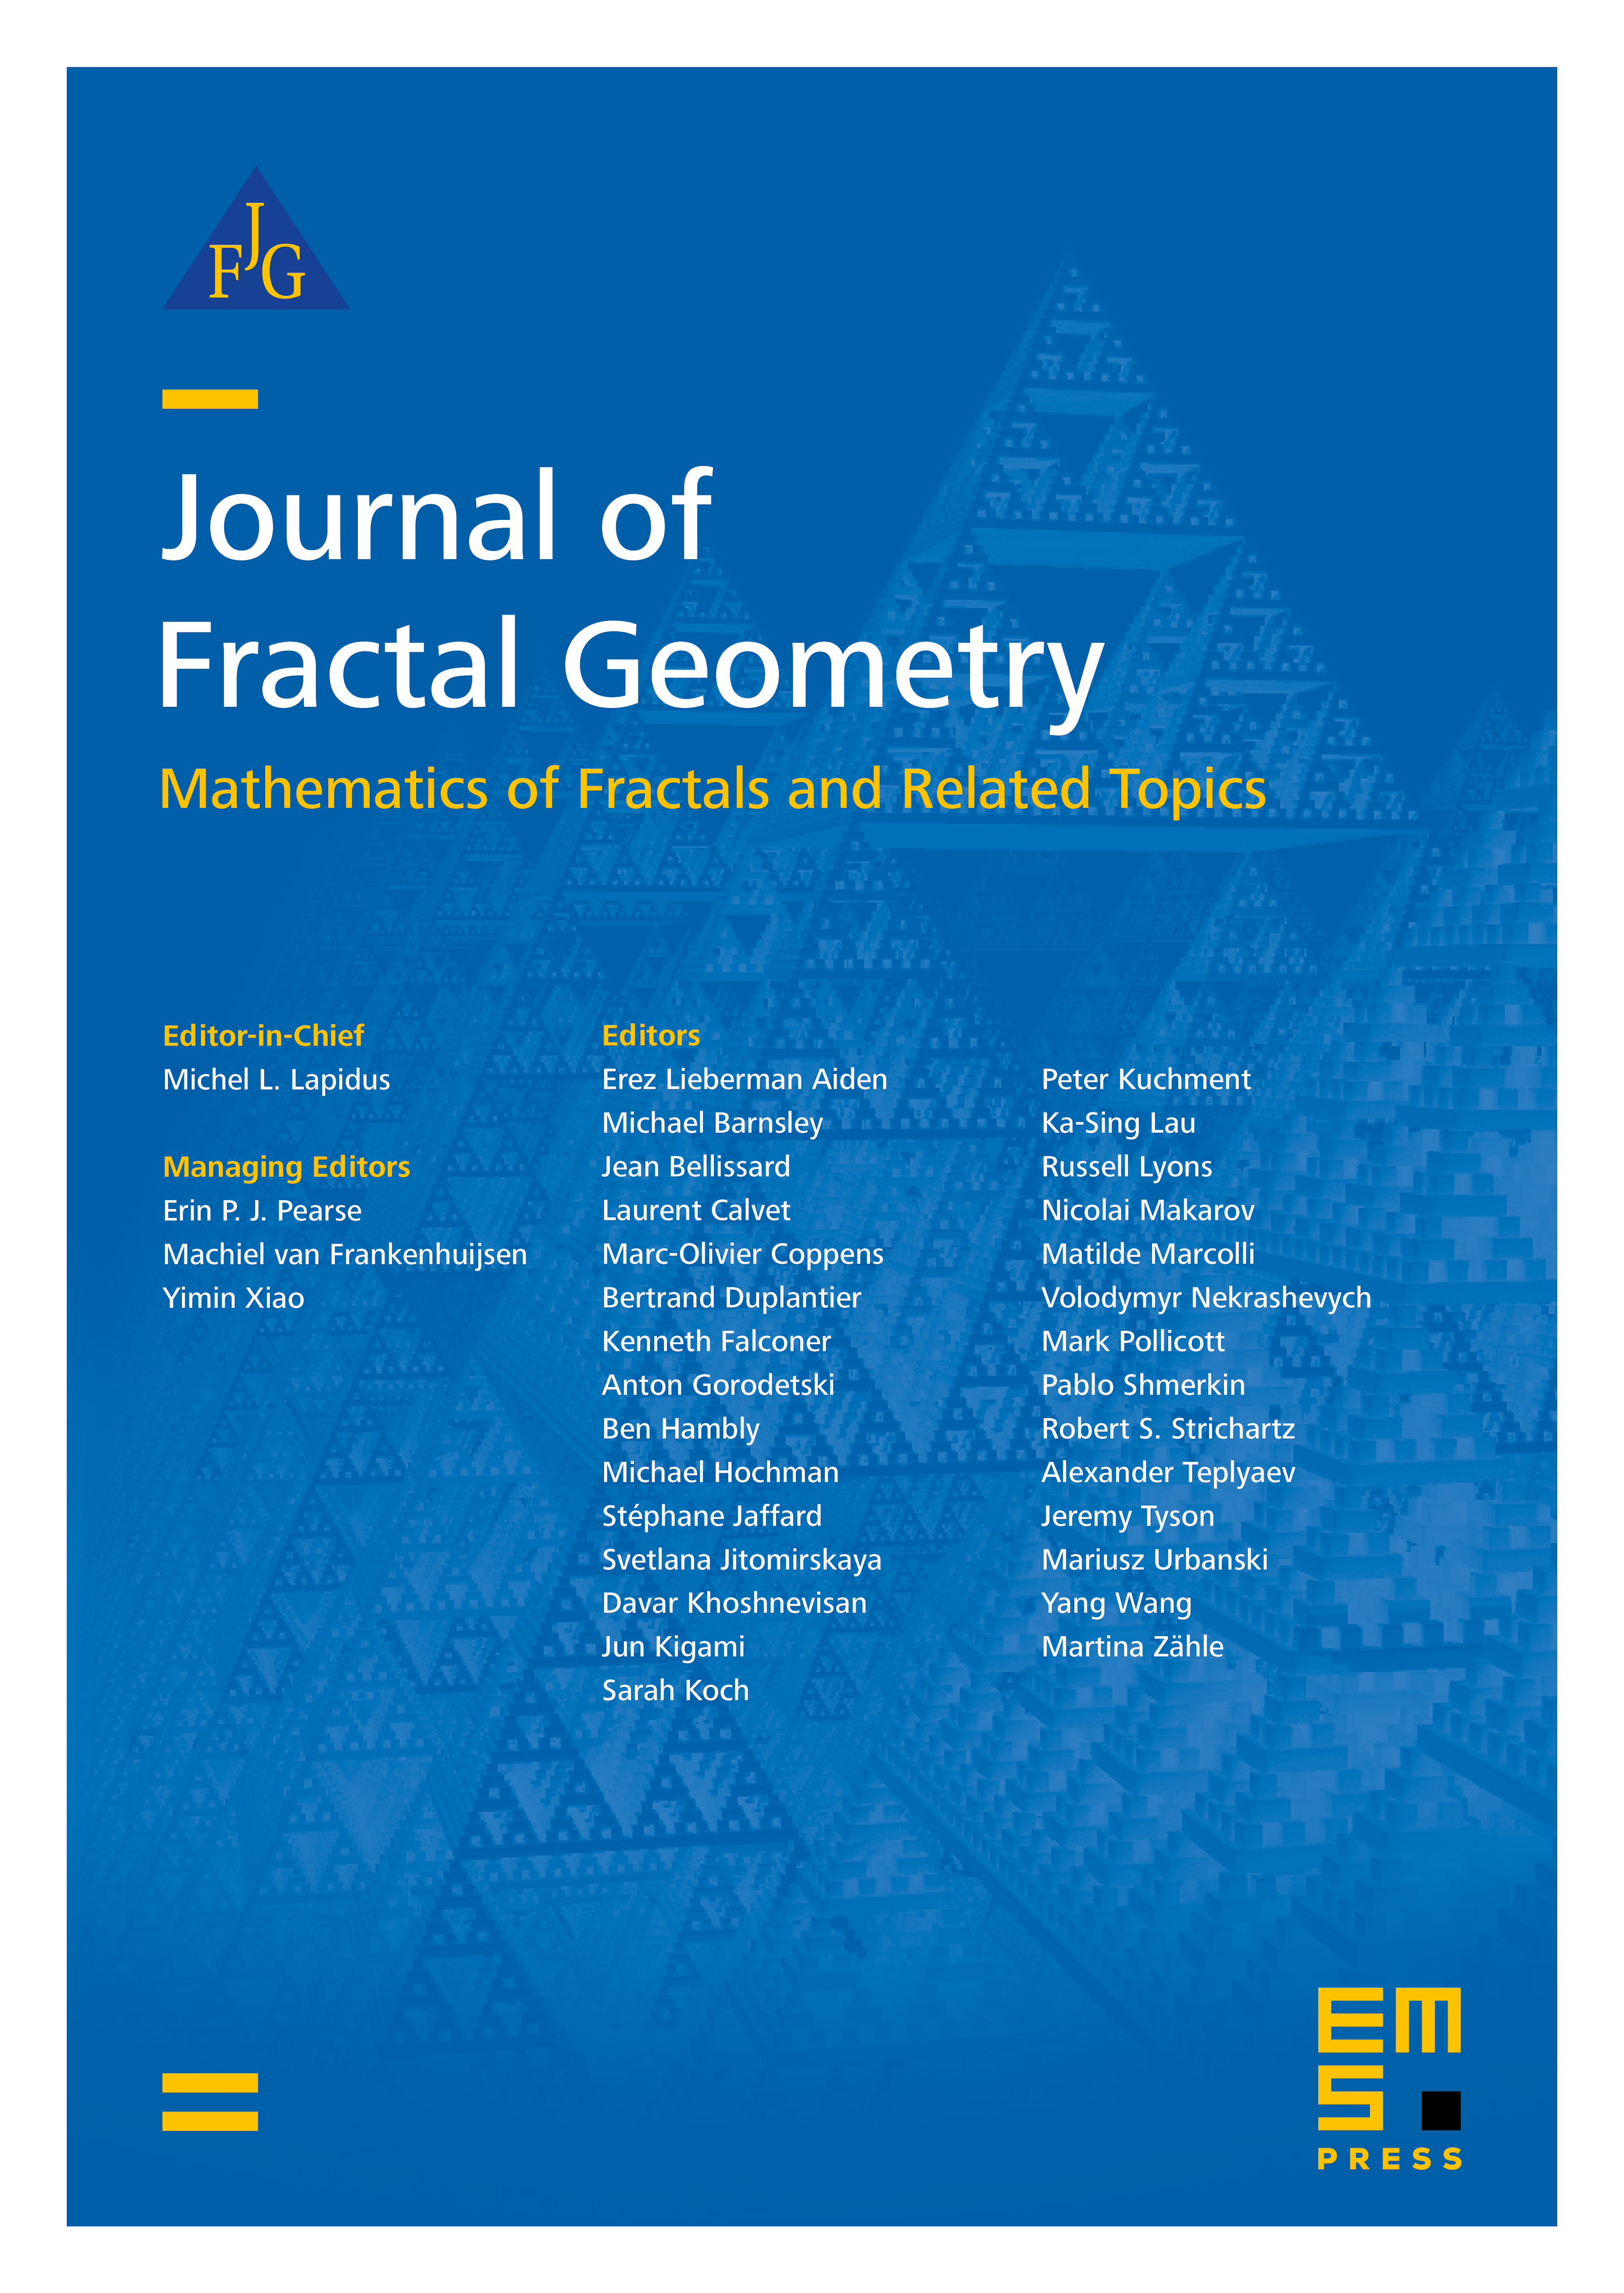 Nonlinear fractal interpolation functions on the Koch curve cover